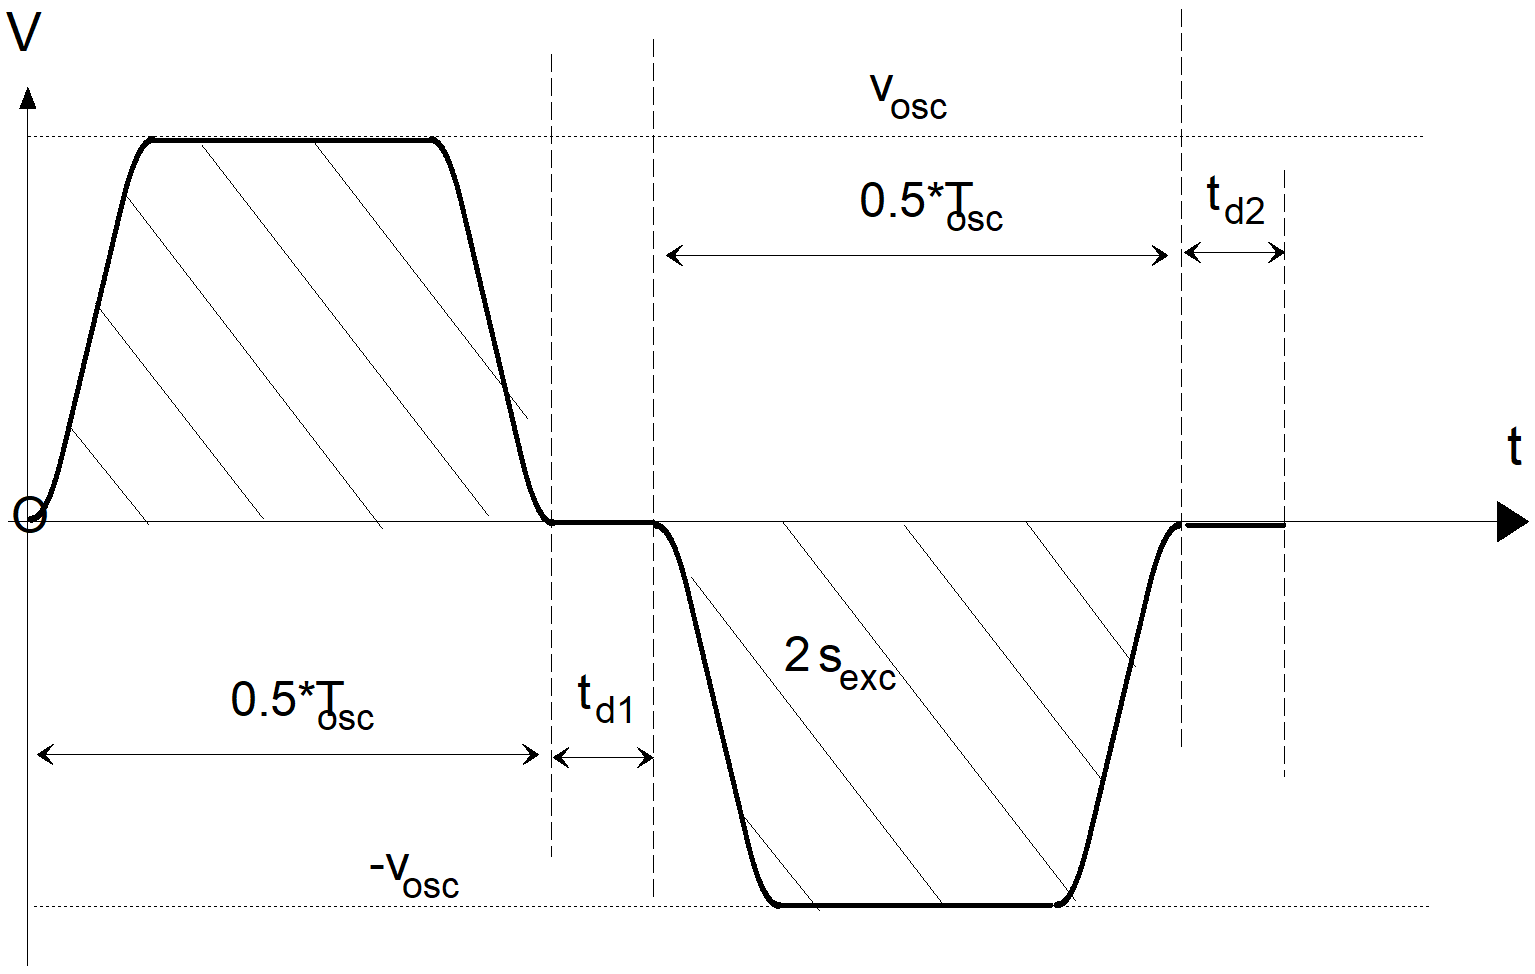 Oscillating motion in the time range with non-linear slope profile